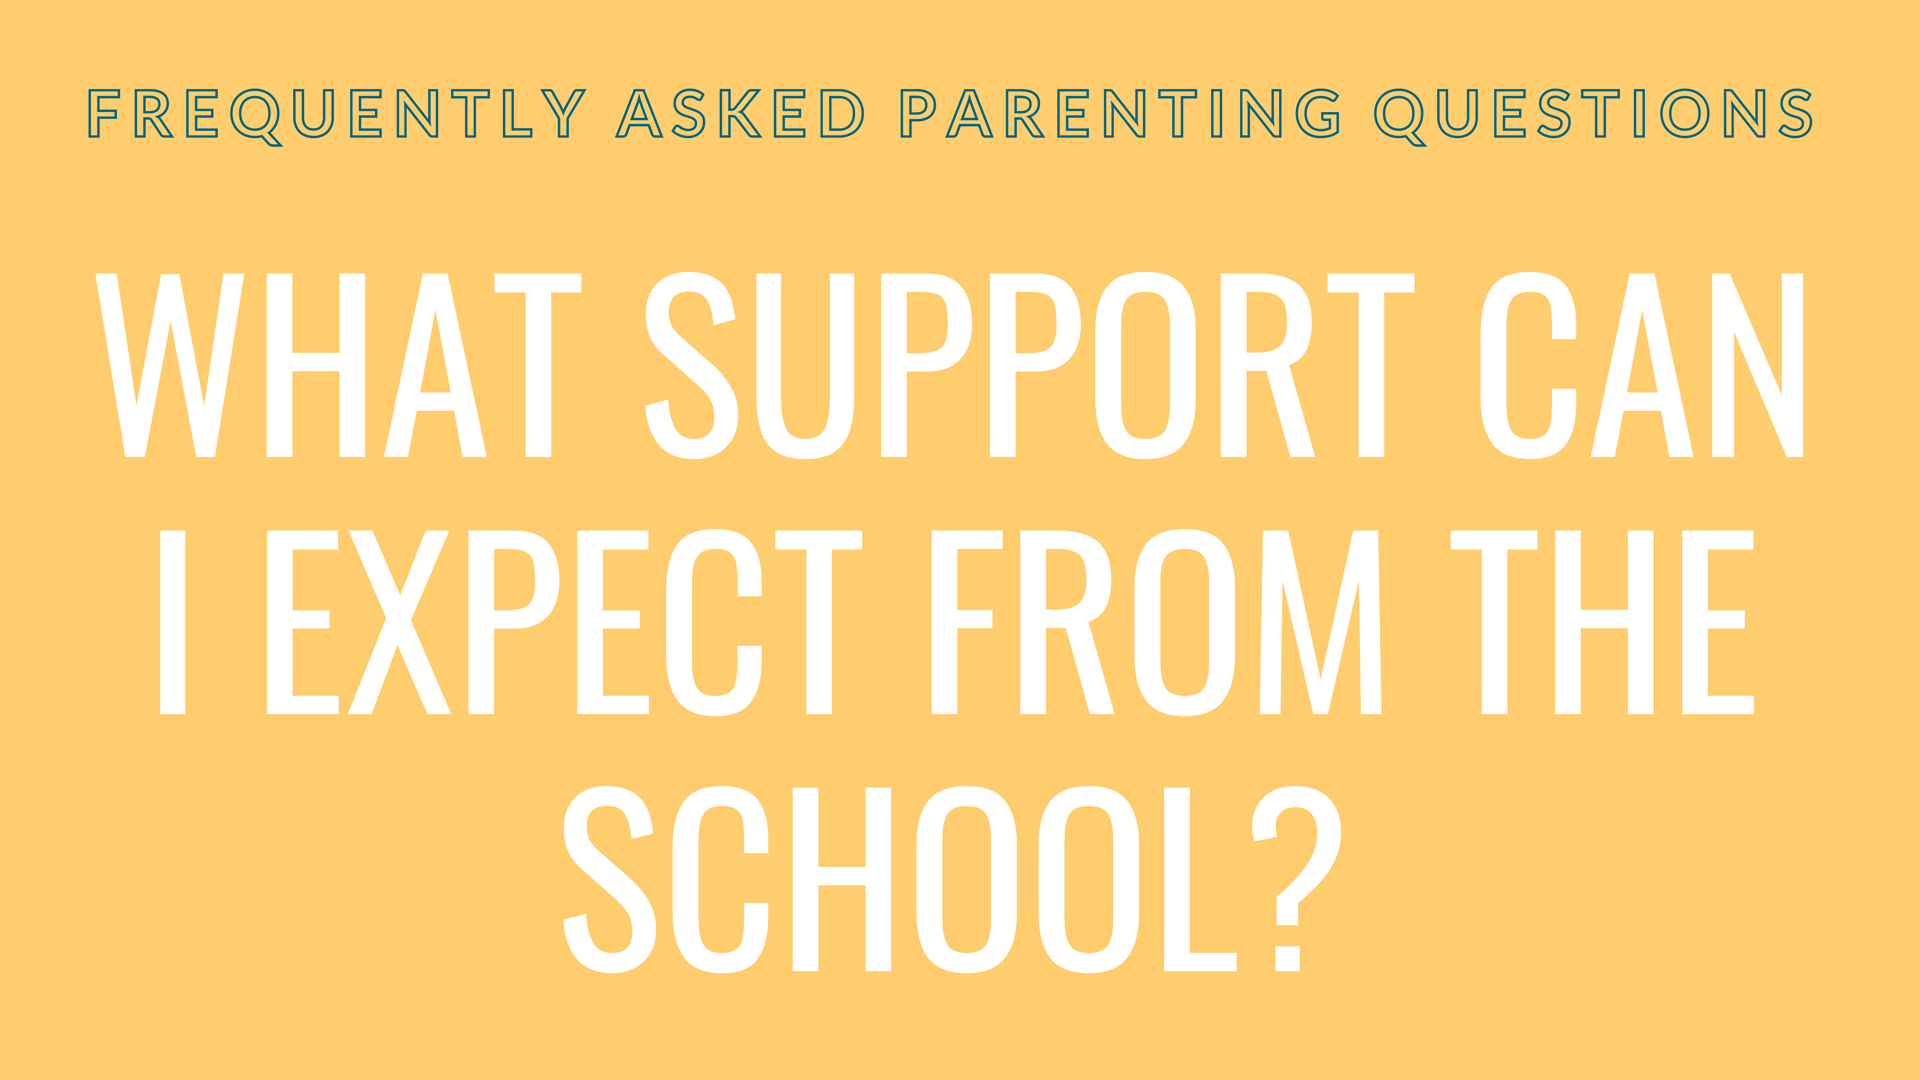 What support can I expect from the school?